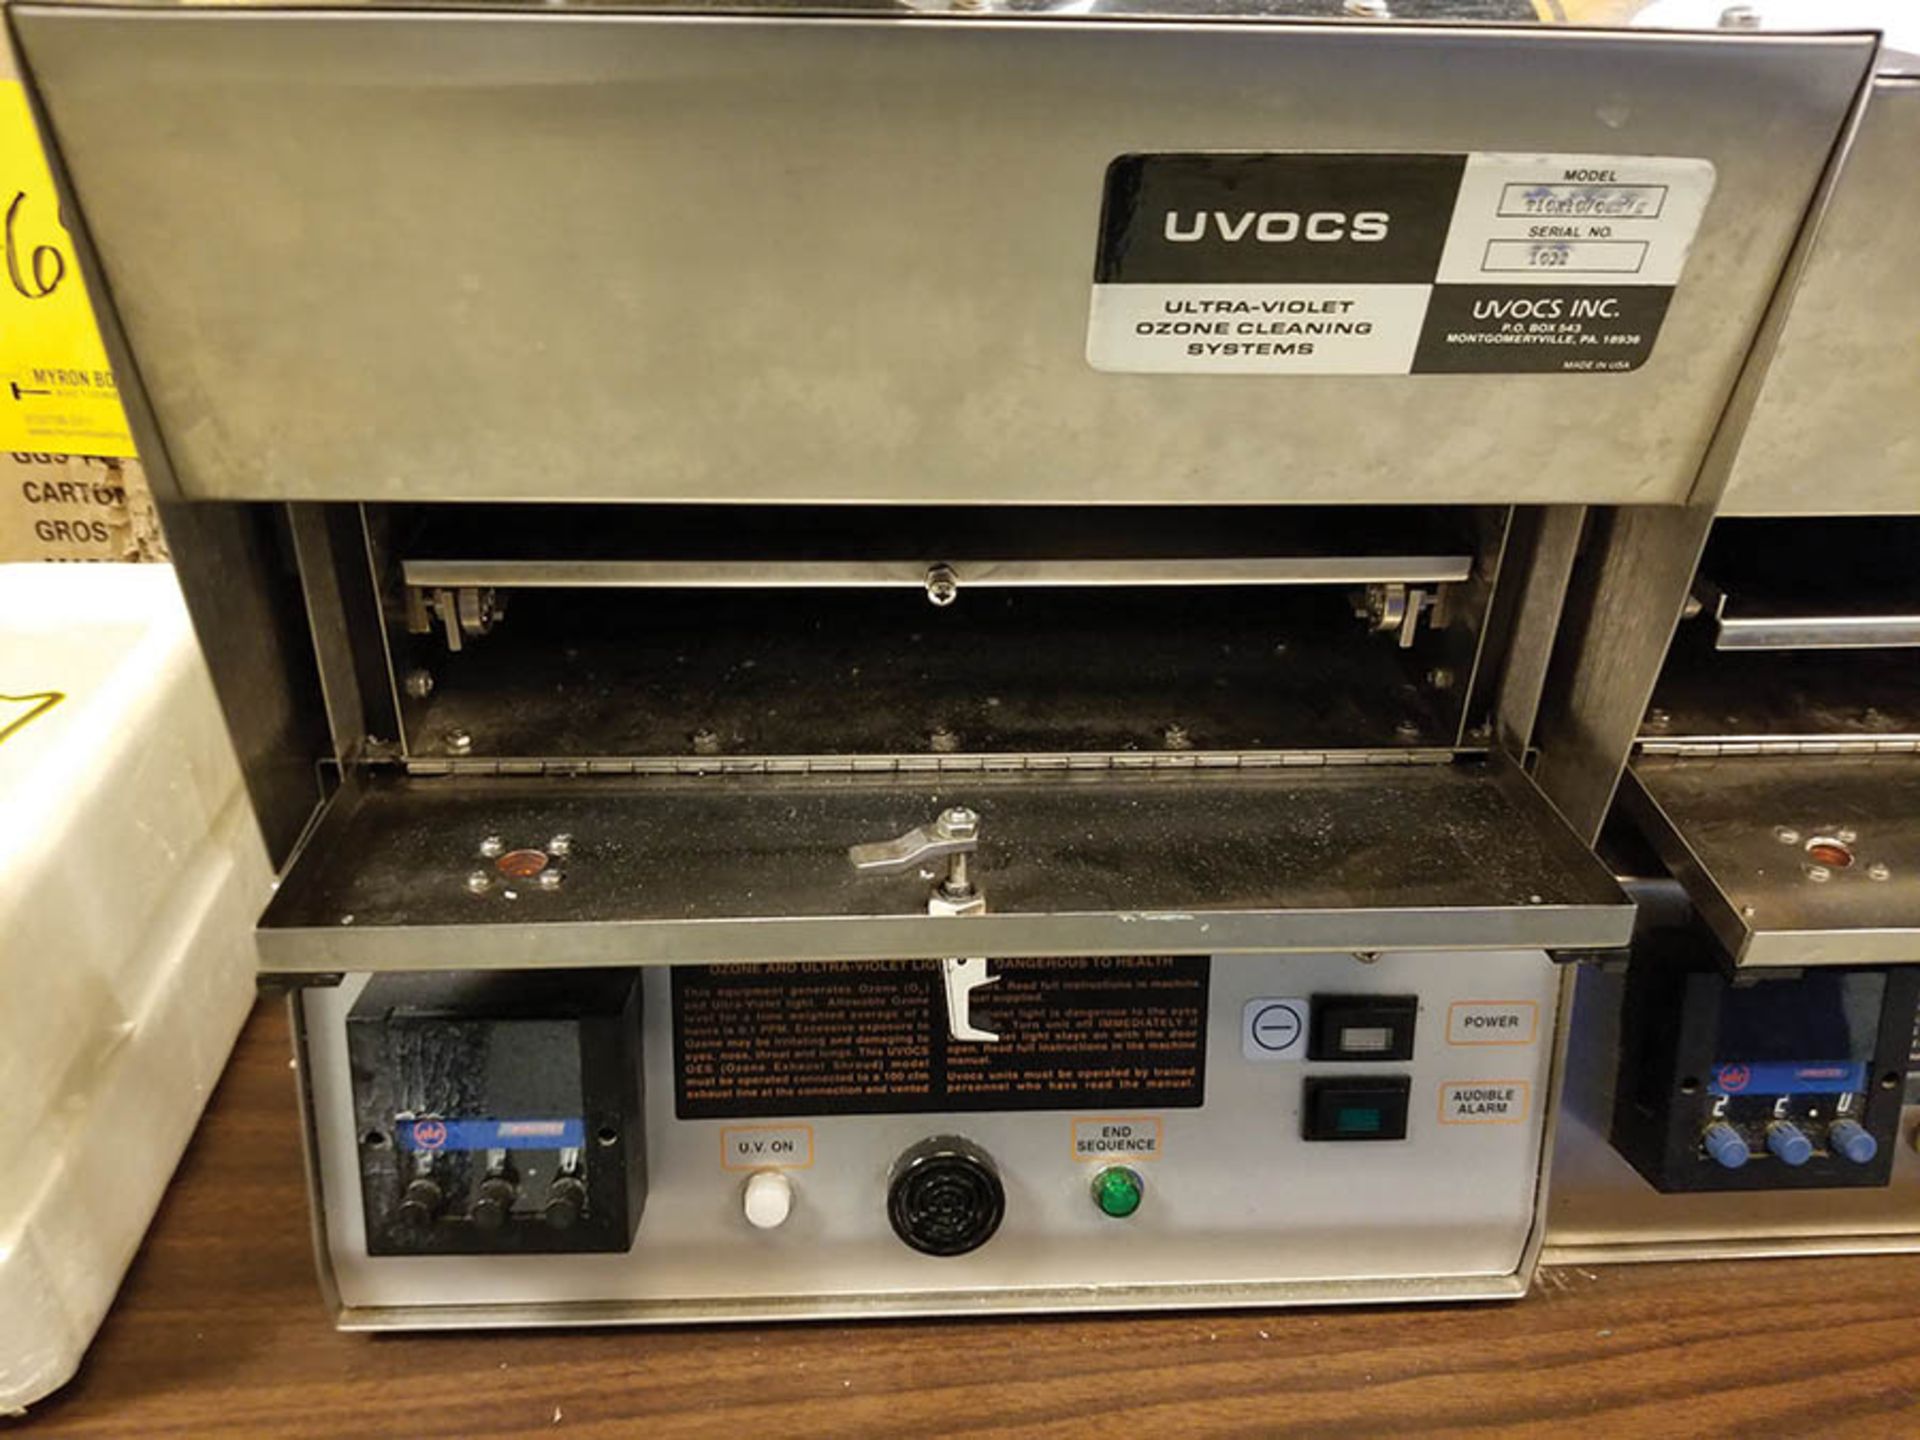 UVOCS T10X10 BENCH TYPE UV OZONE CLEANER, STAINLESS STEEL, S/N 1032